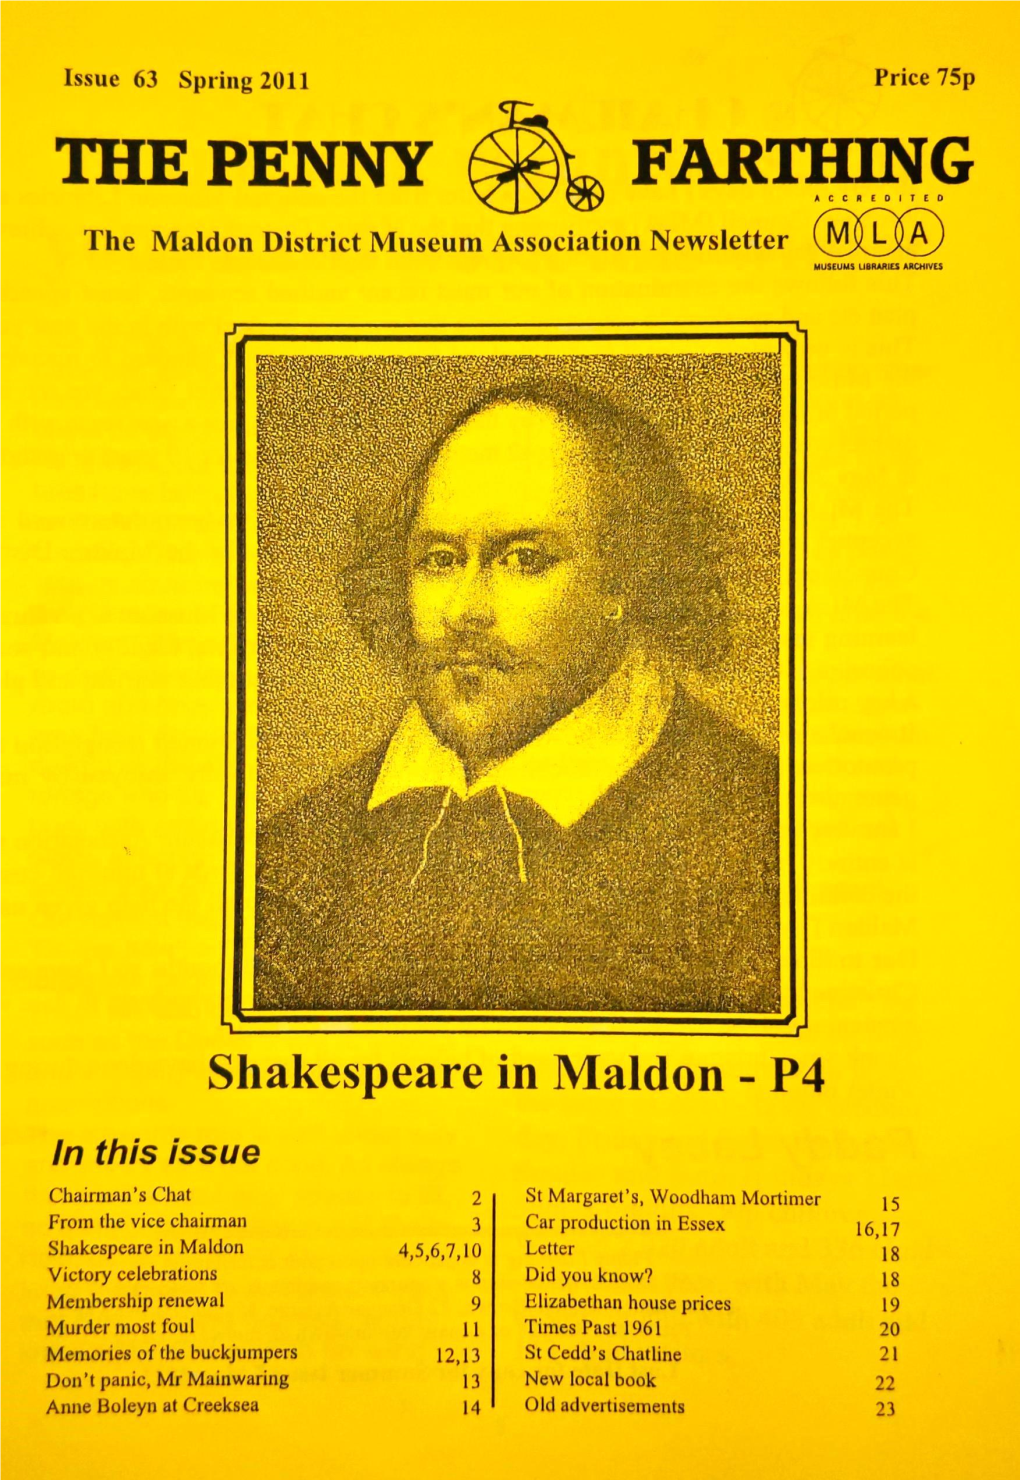 FARTHINGACCREDITED the Maldon District Museum Association Newsletter M L a MUSEUMS LIBRARIES ARCHIVES